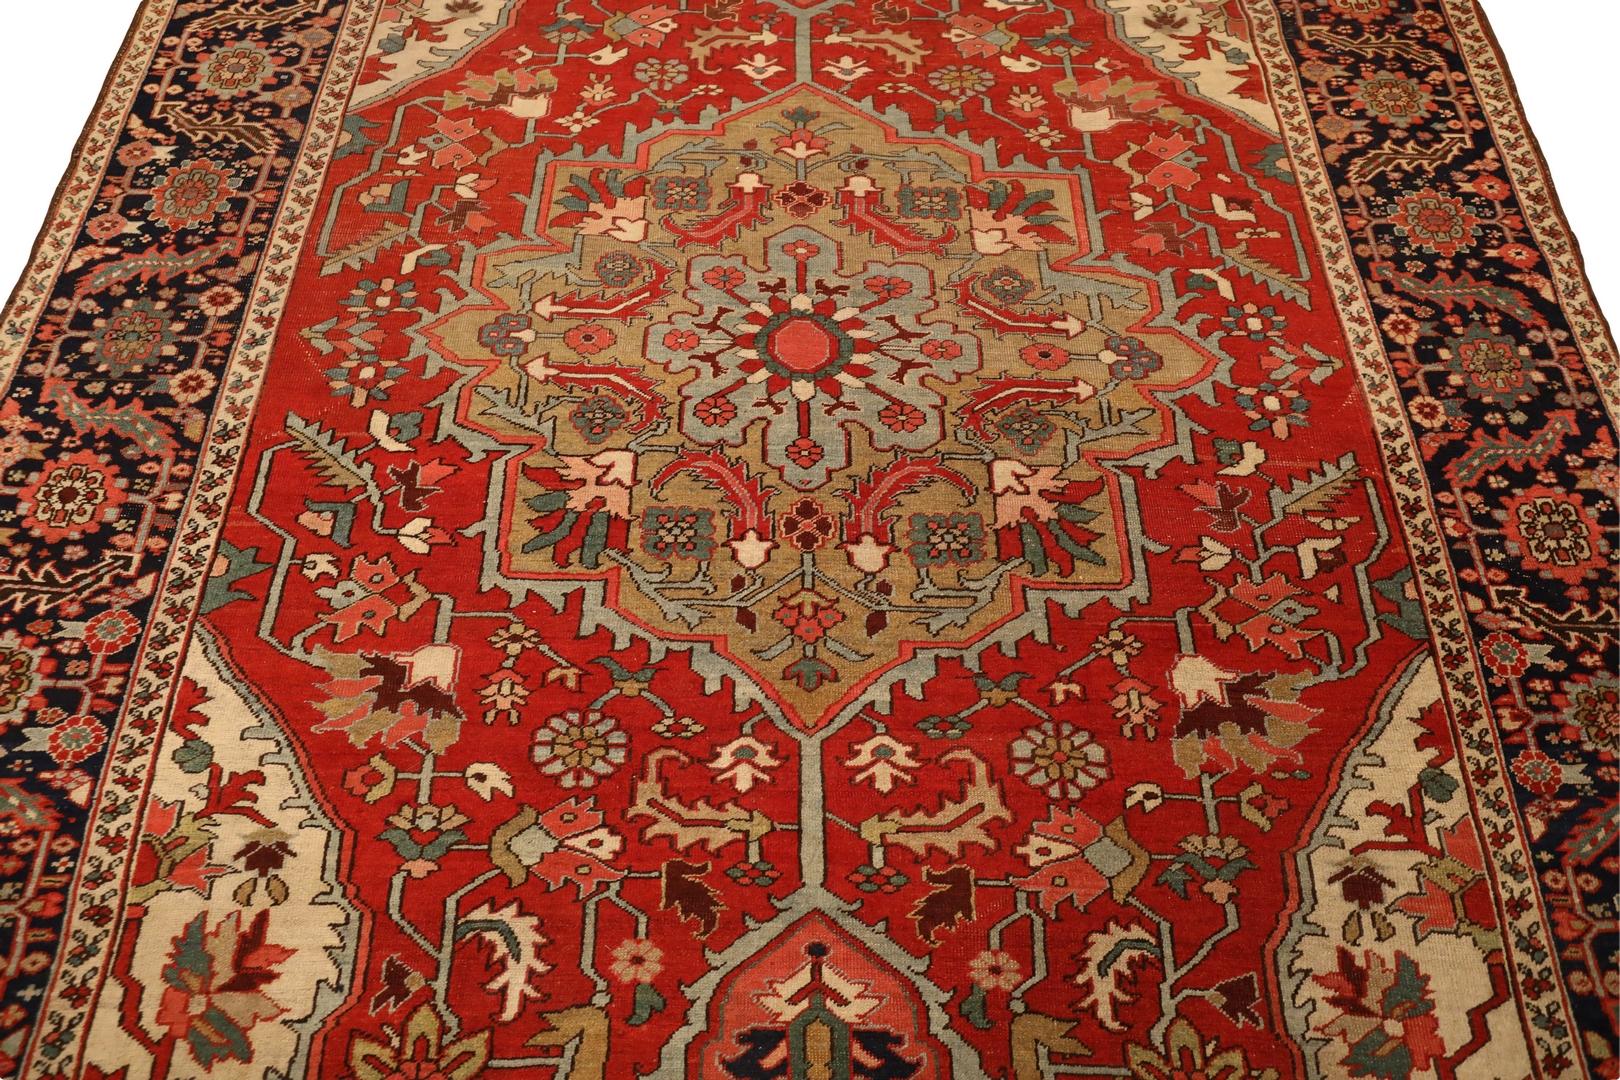 Hand-Knotted Serapi Antique Room-Size Rug - 7'10